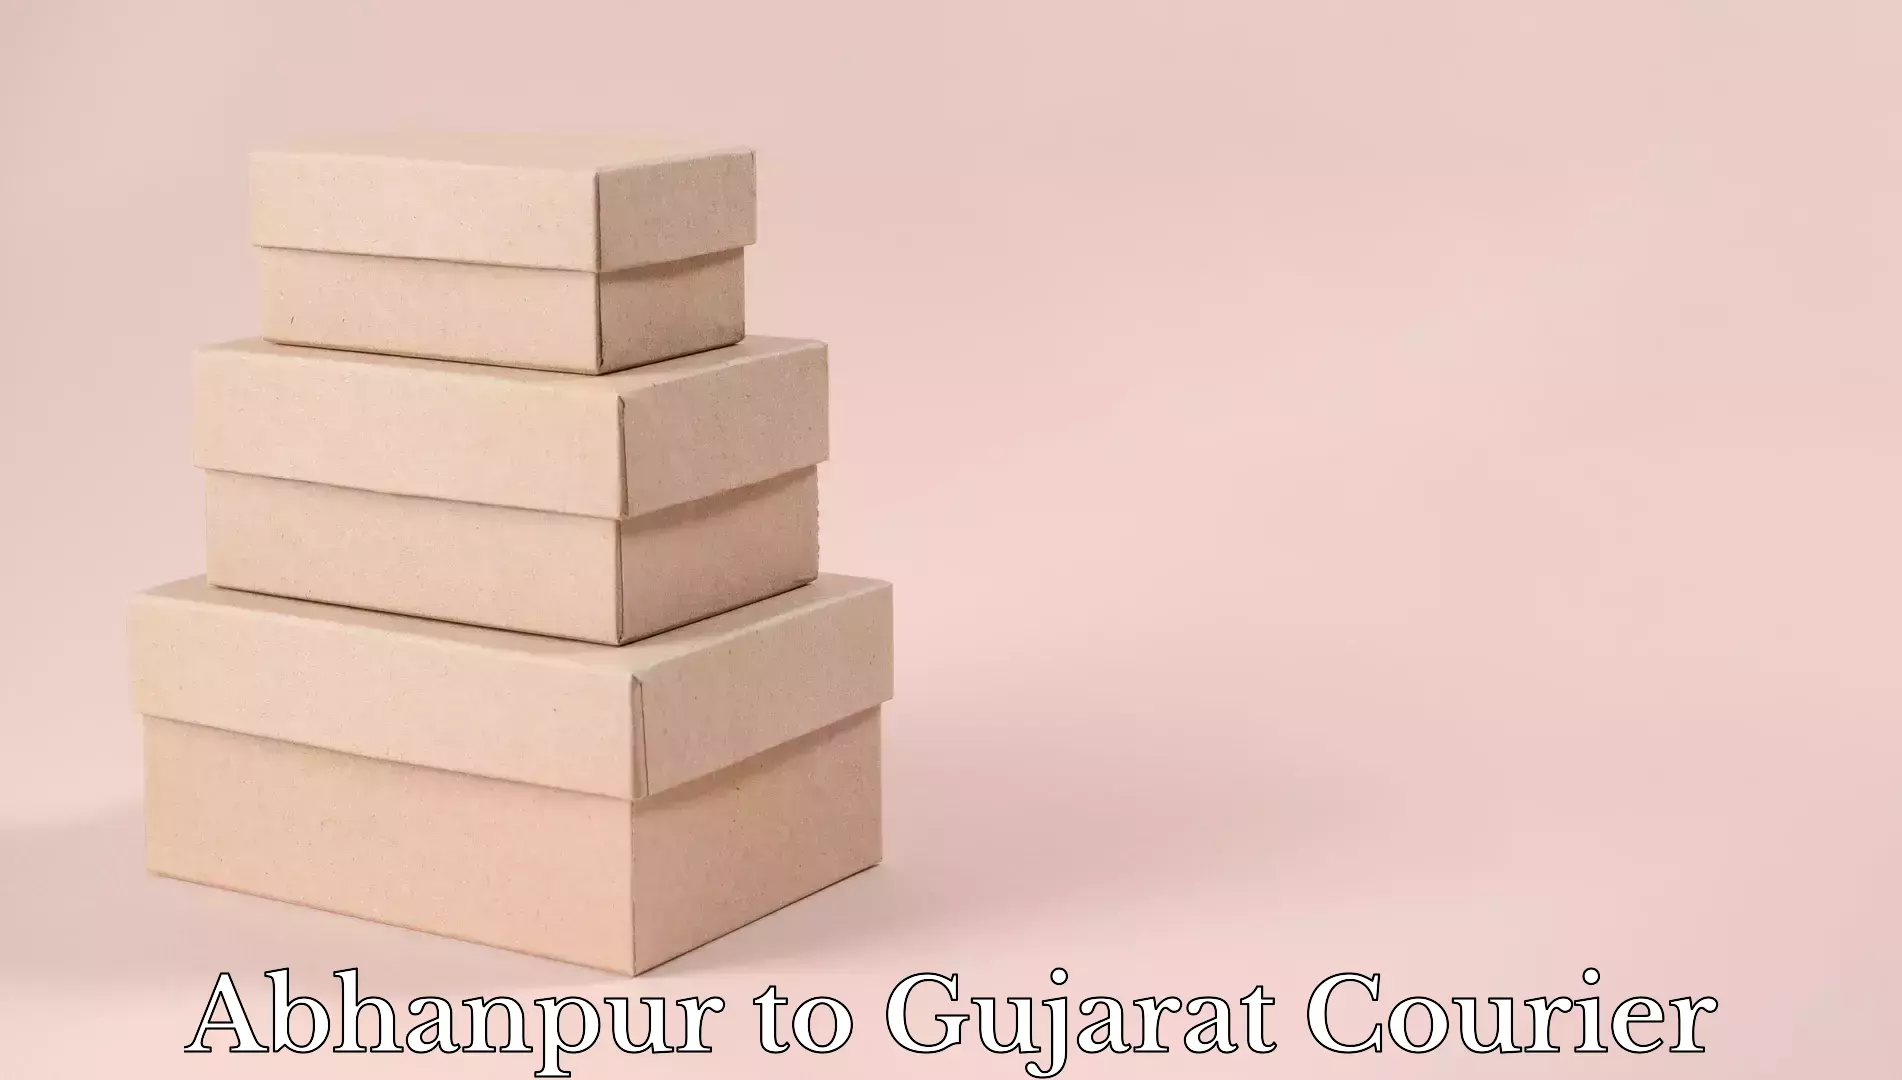 Baggage transport professionals Abhanpur to Gujarat